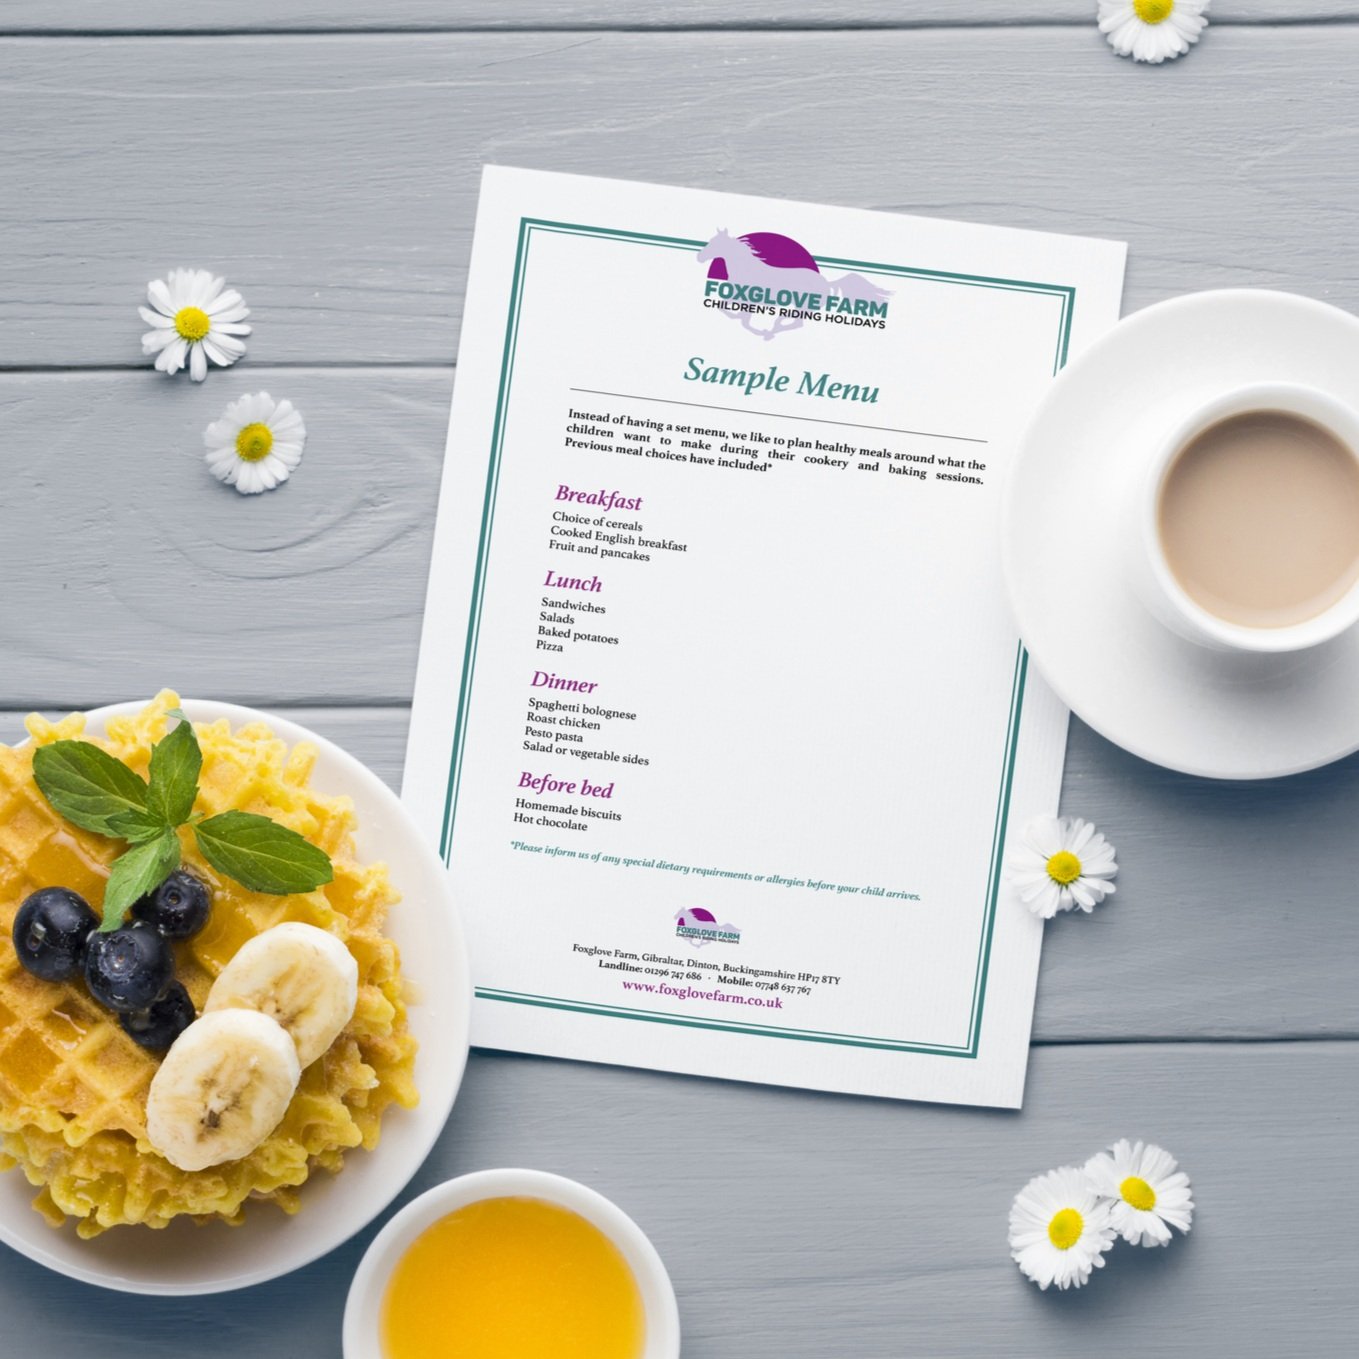 Foxglove Farm Menu designed by Yeswaydesign photographed on a wooden breakfast table with daisies scattered around, a waffle on a plate, with slices of banana, blueberries, mint, coffee, orange juice